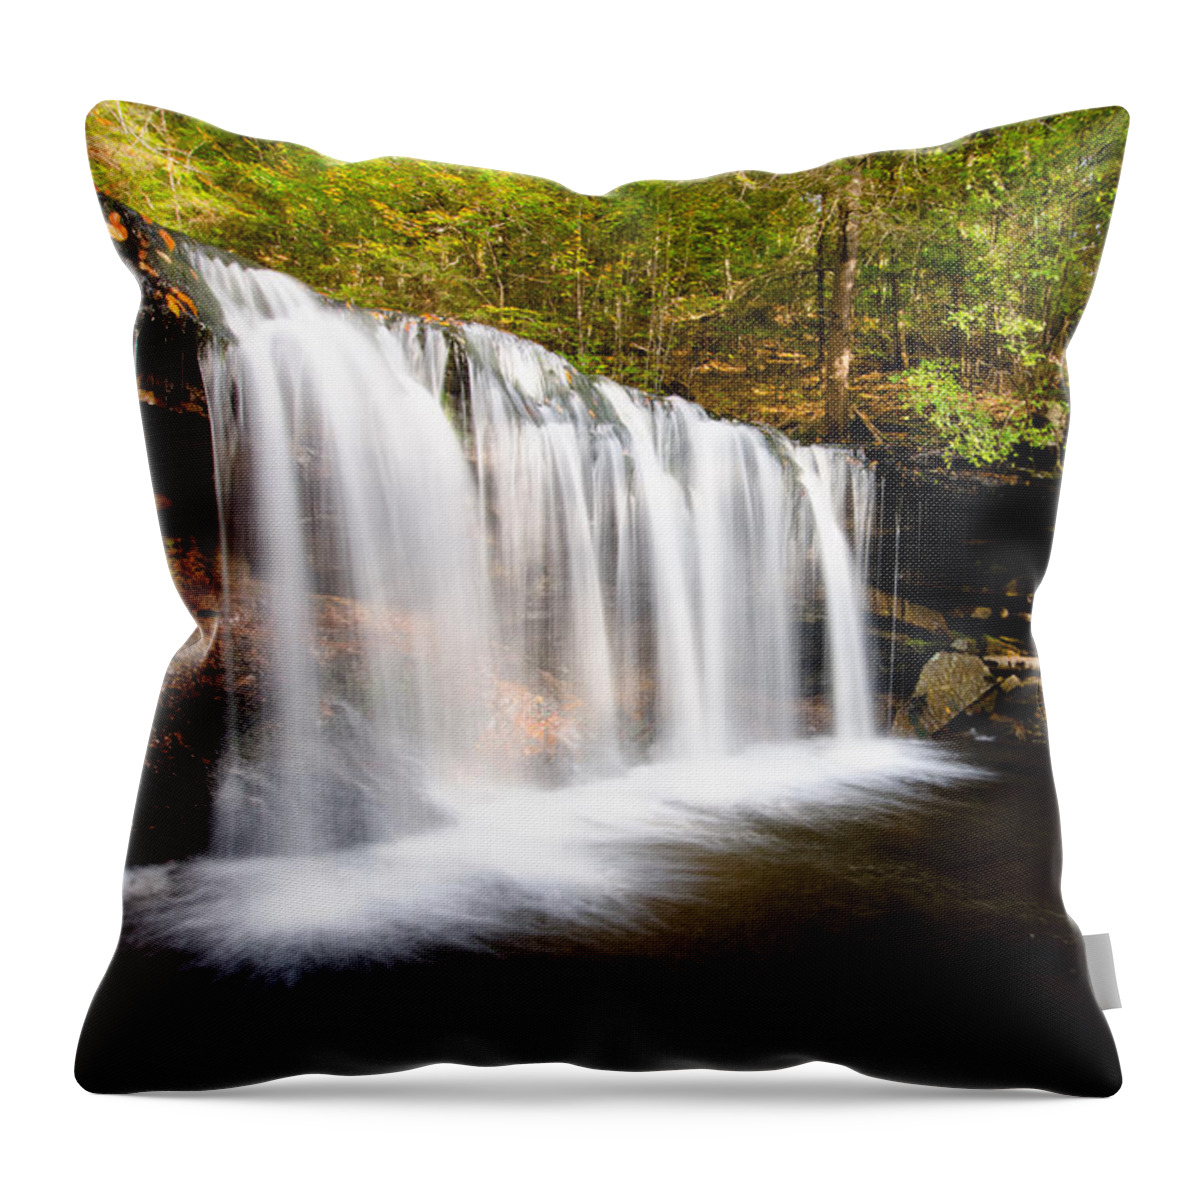 Cascade Waterfalls Throw Pillow featuring the photograph Across the Ledge Waterfall by Crystal Wightman